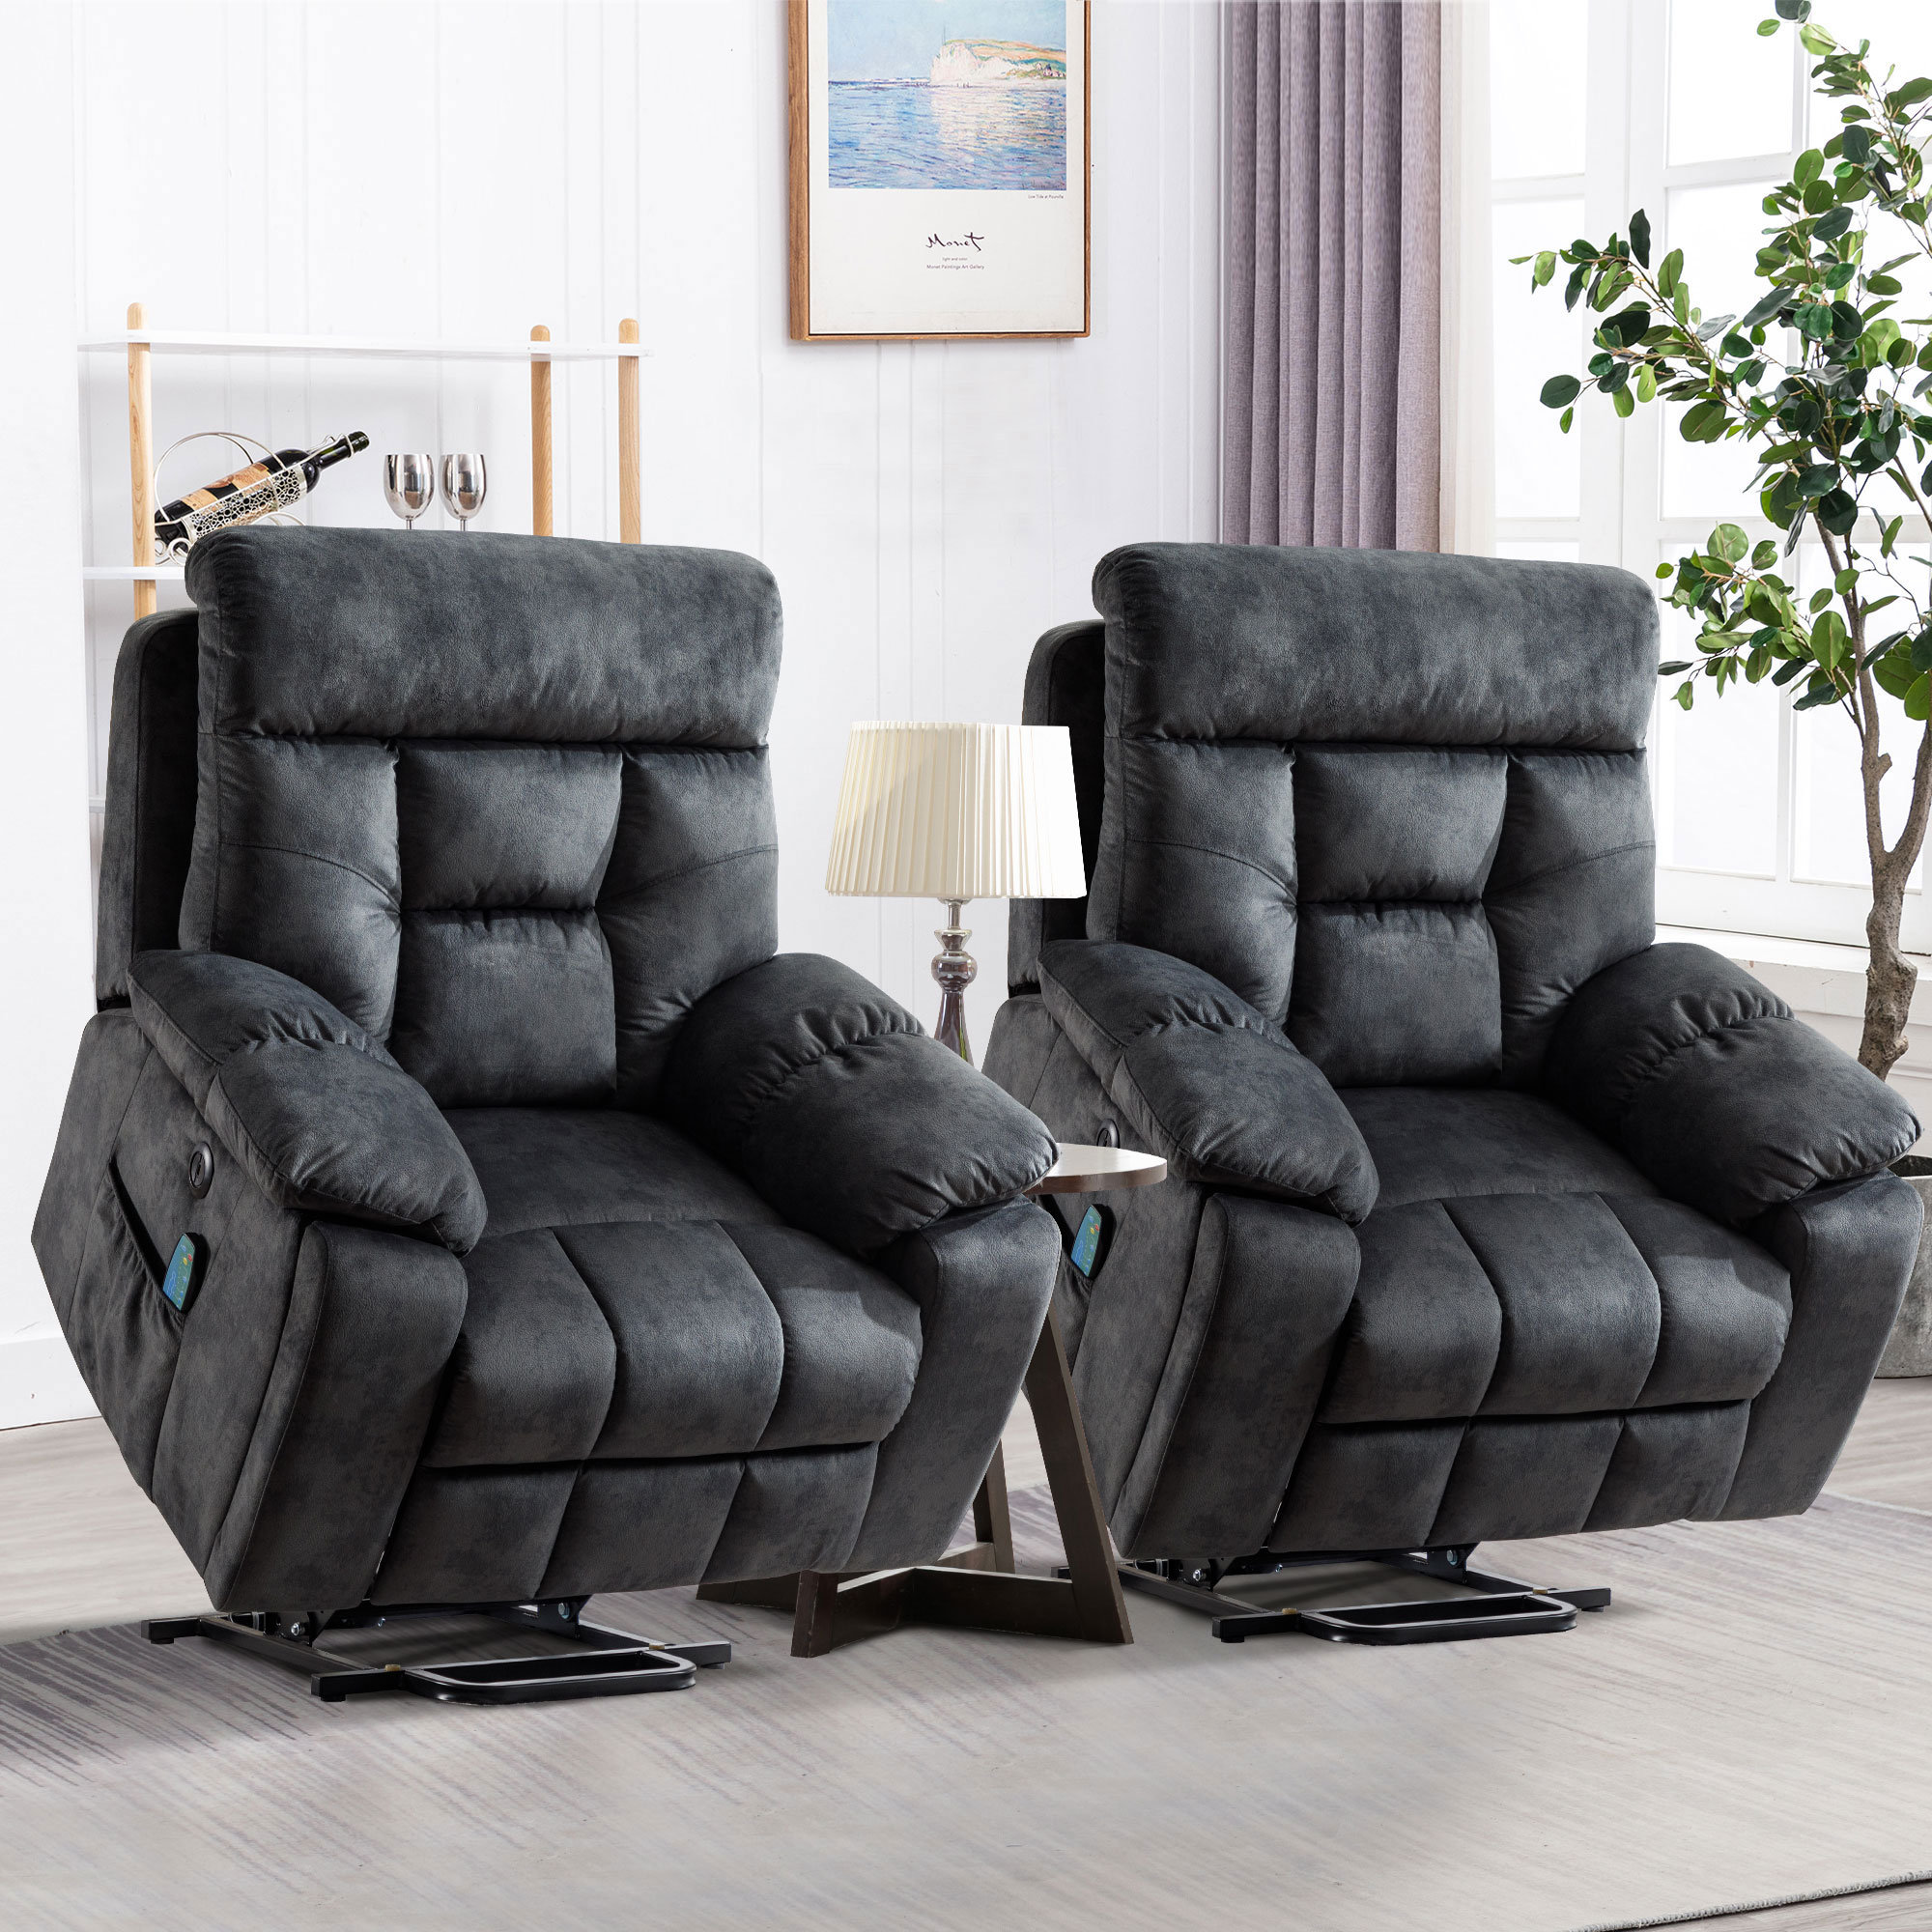 Latitude Run® Massage Recliner Chair, Recliner Sofa PU Leather For Adults,  Recliners Home Theater Seating With Lumbar Support, Reclining Sofa Chair